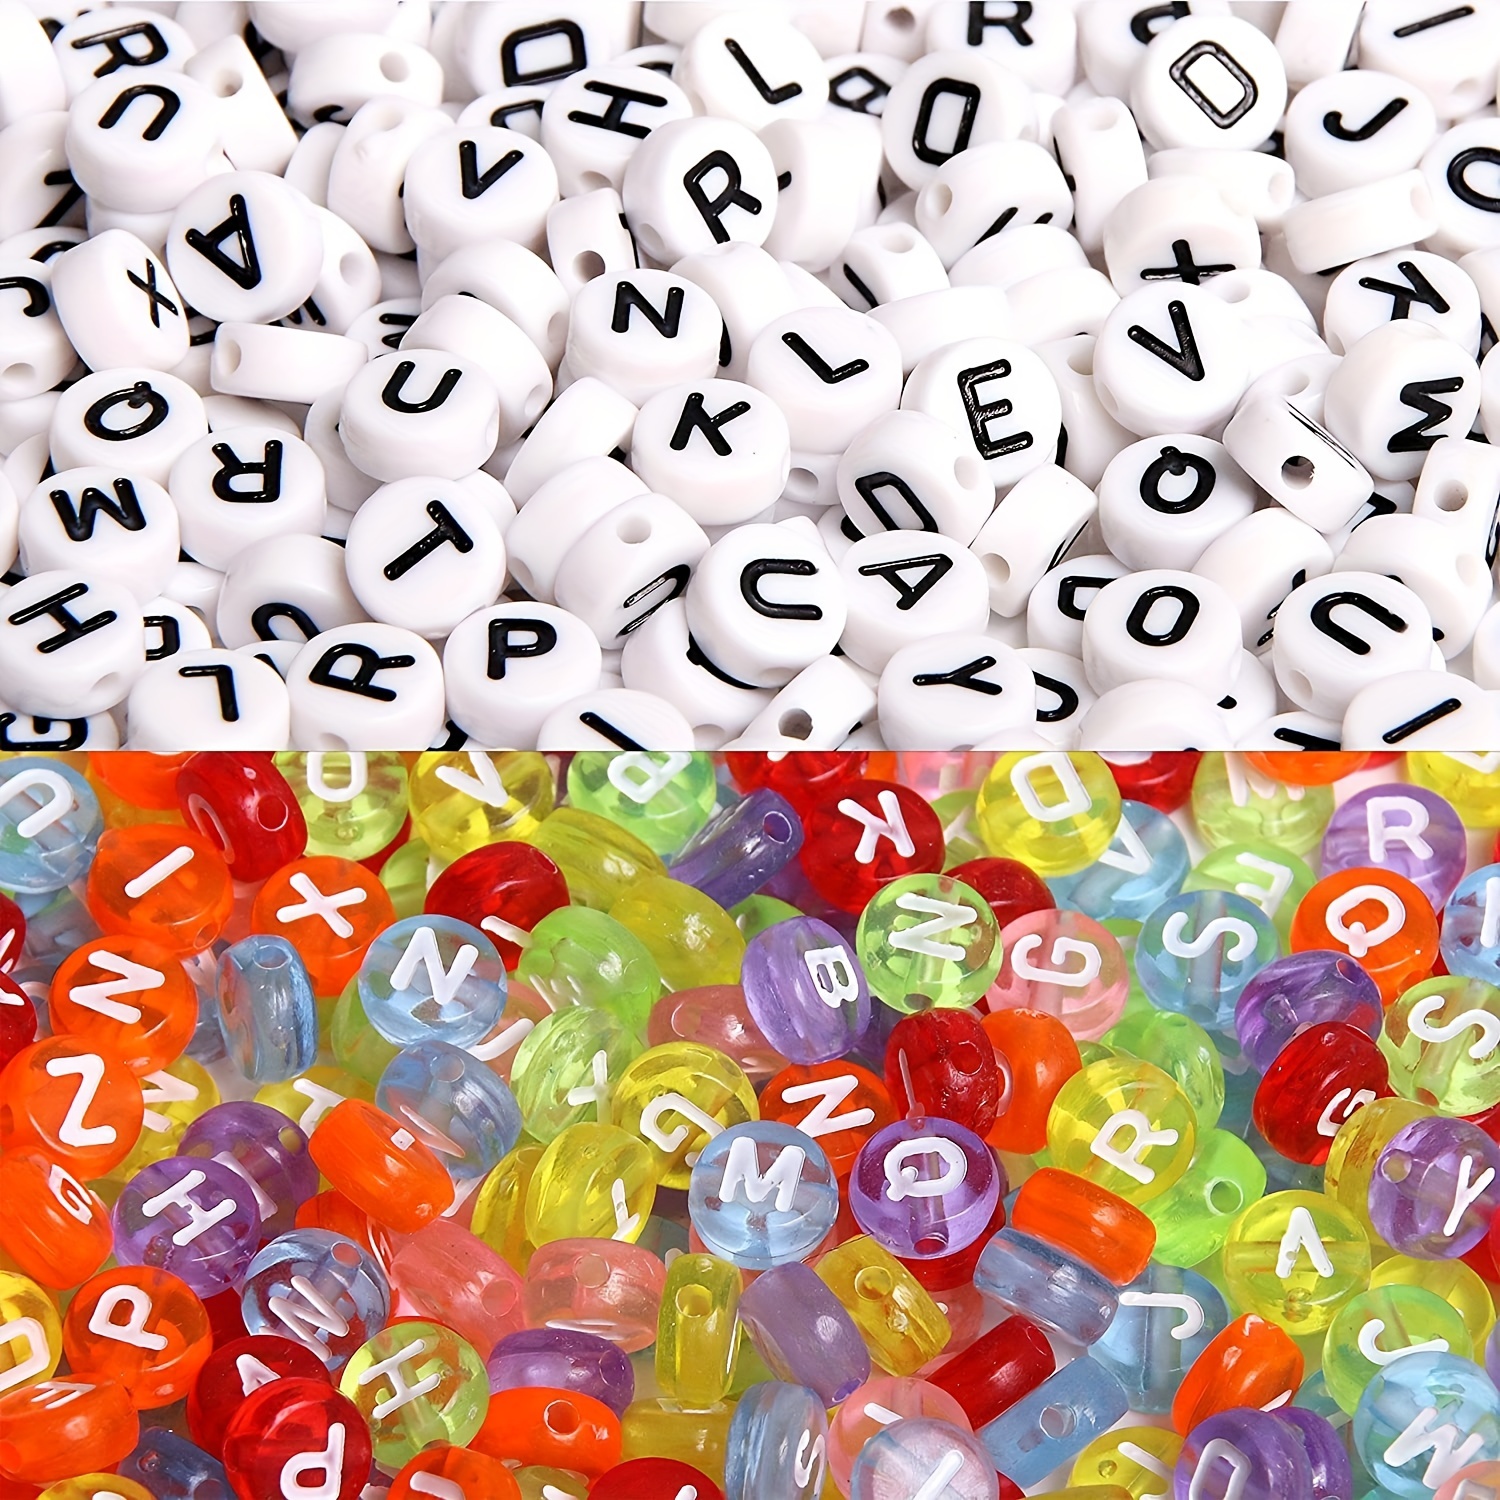 1400pcs Colorful Letter Beads For Jewelry Making, 28 Style Round A-Z  Alphabet Acrylic Beads Kits Heart Beads For Bracelets Making (4 * 7mm)